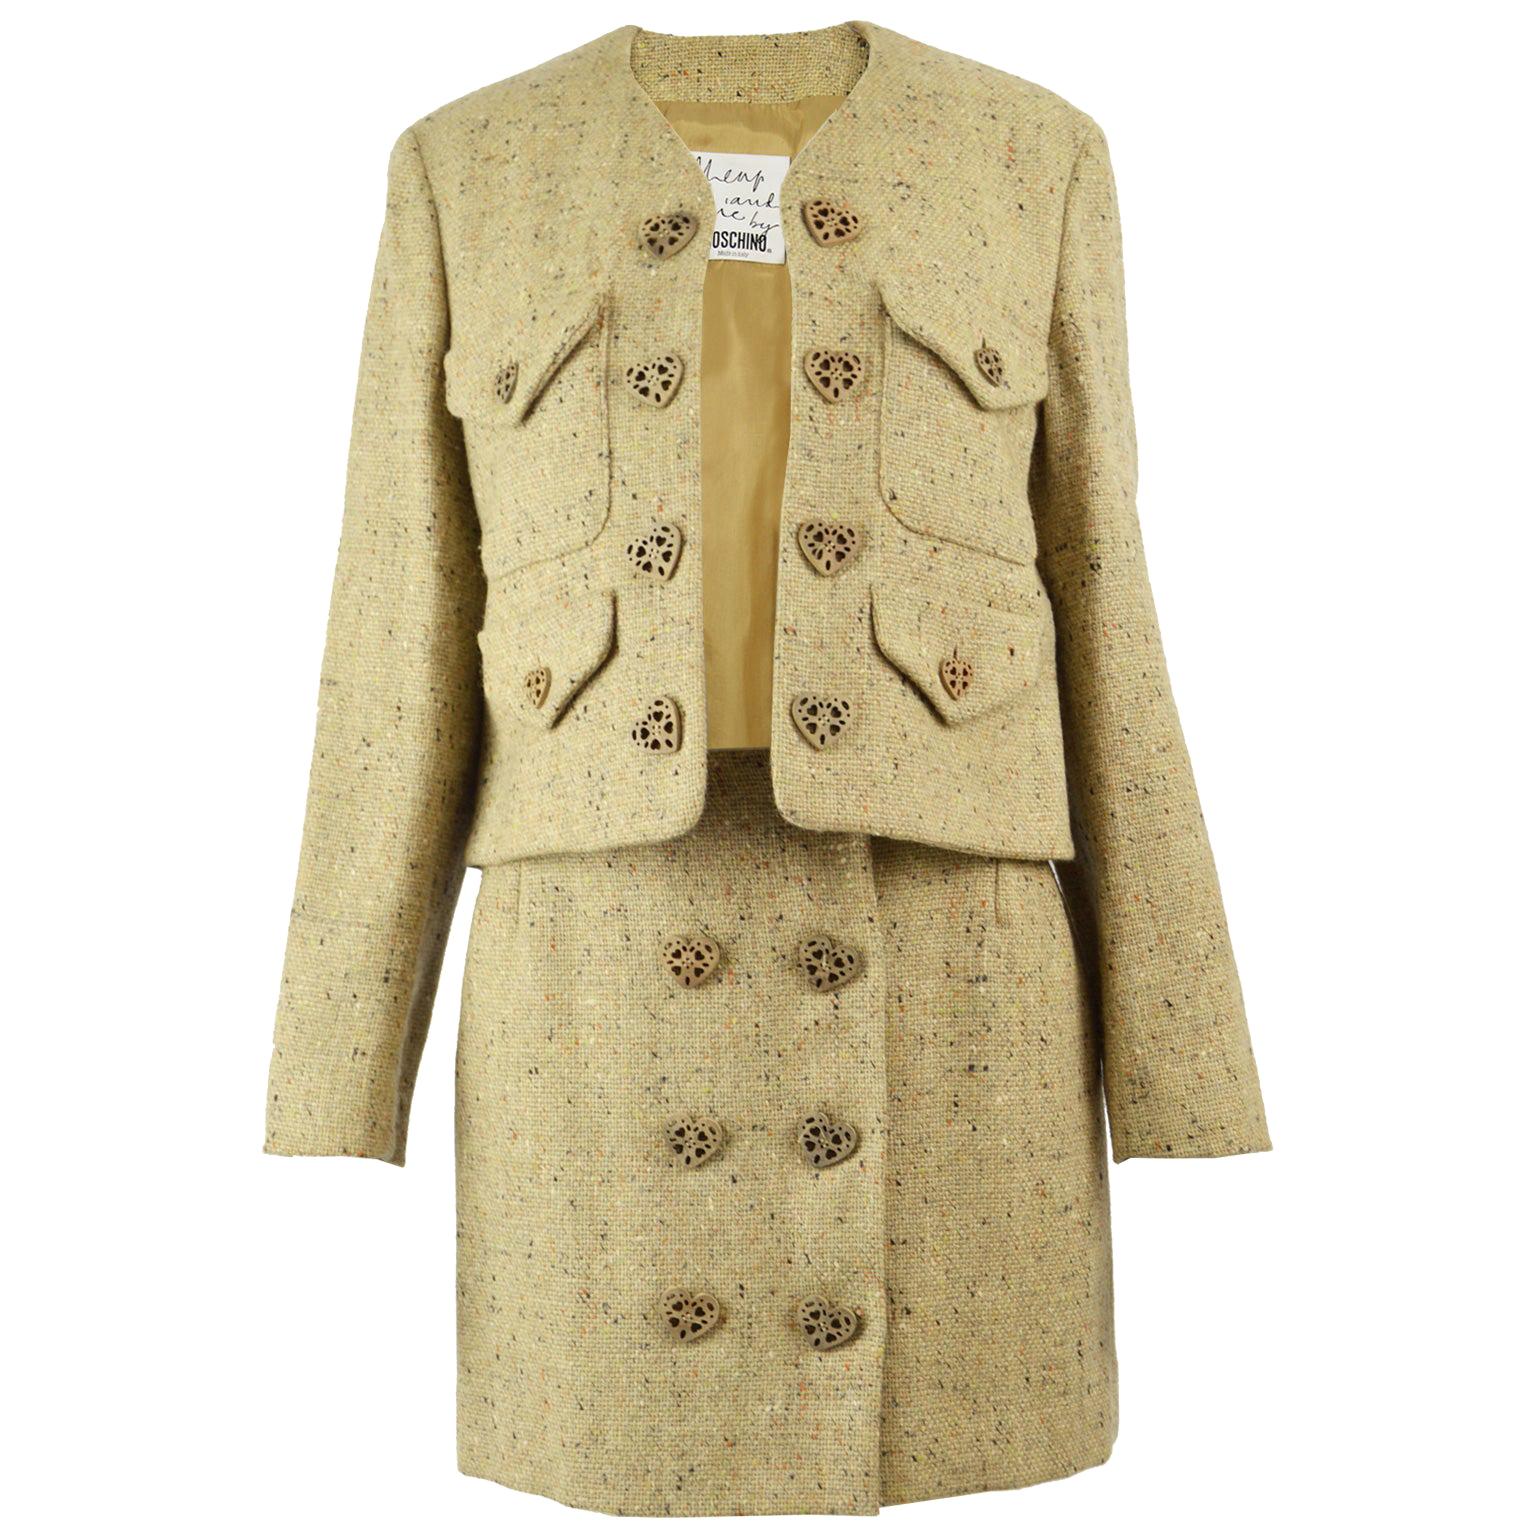 Moschino Vintage Wool Tweed 2 Piece Jacket & Skirt Suit with Heart Button, 1990s For Sale